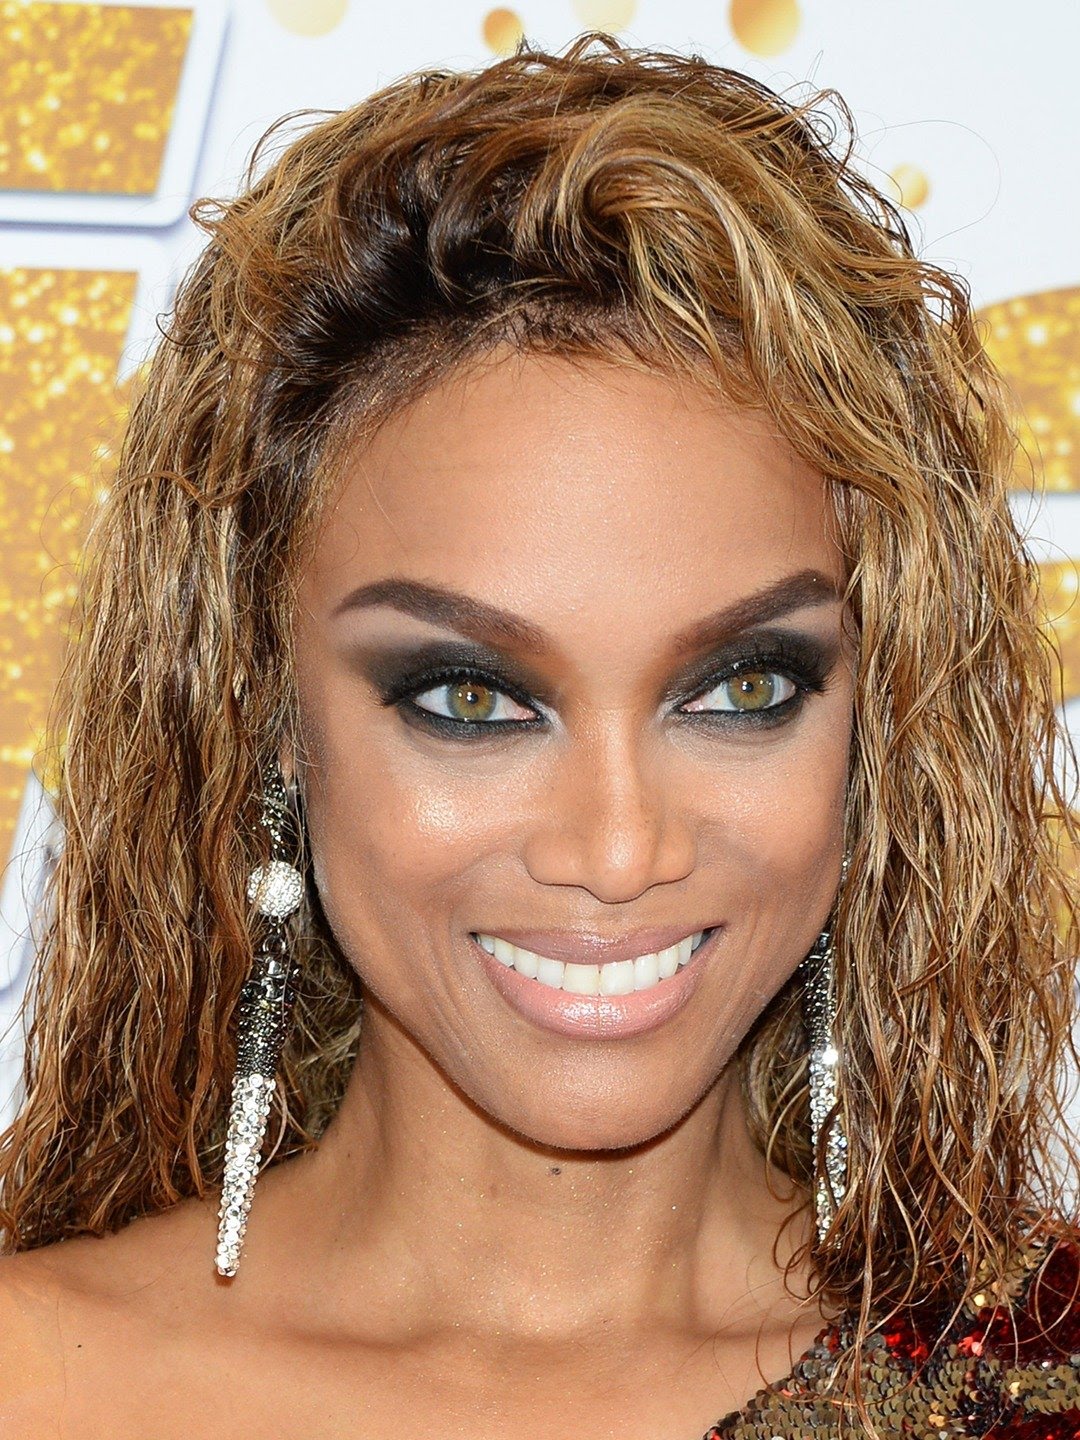 Tyra Banks American Tv Personality, Model Businesswoman, Producer, Actress, Writer, Singer